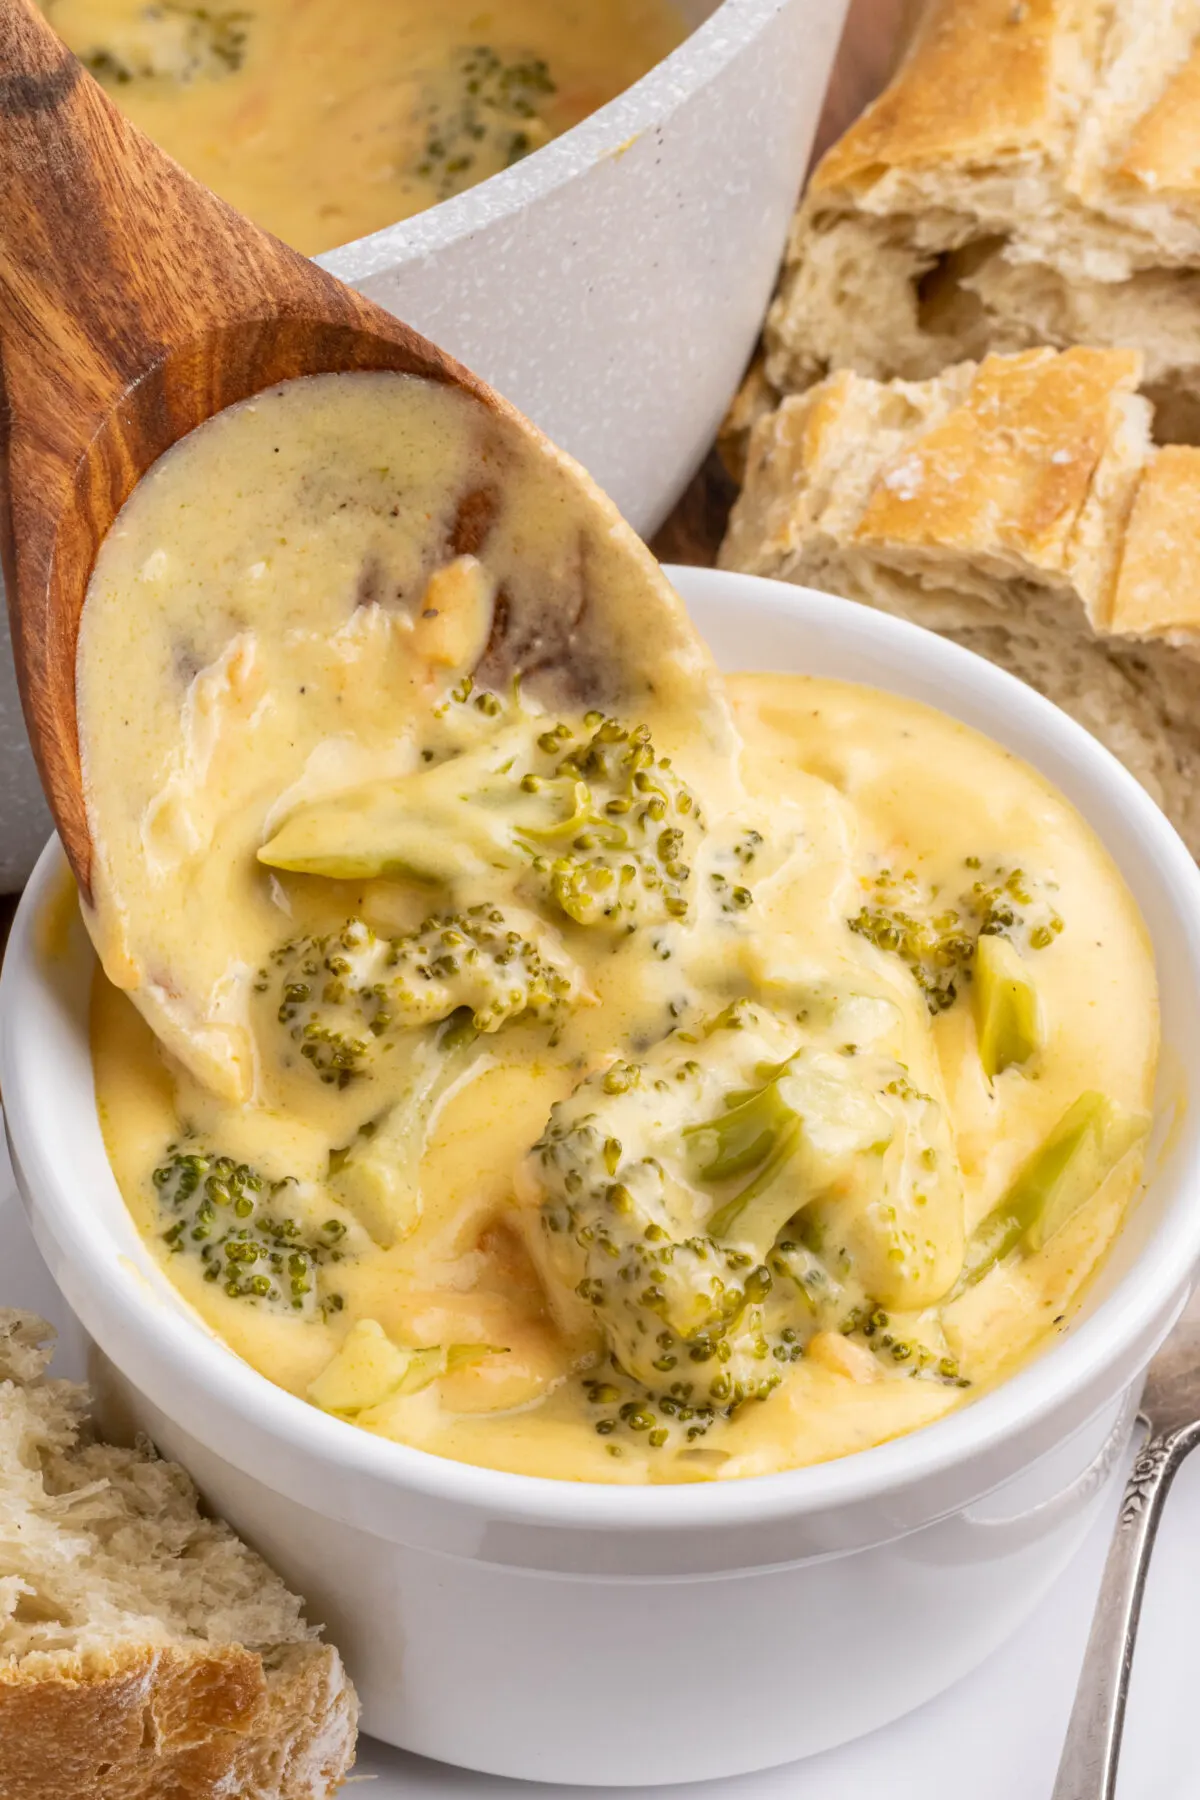 Craving soup? Get your pot ready and make the most delicious, comforting broccoli cheddar soup ever. It's easier than you think!